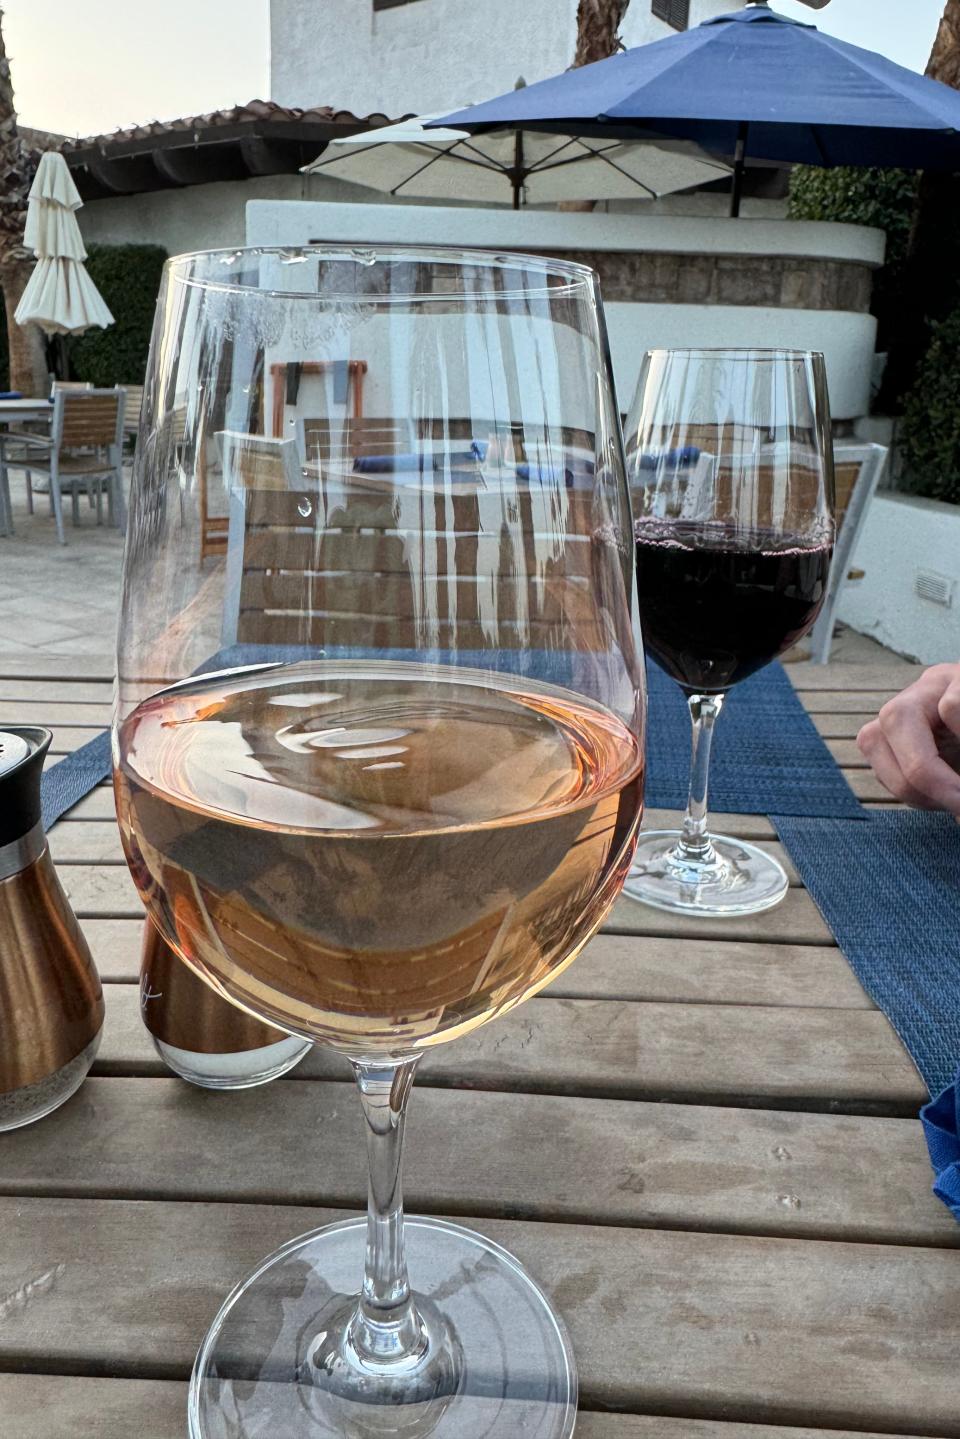 Two glasses of wine, one red and one rosé, on an outdoor table with umbrellas in the background